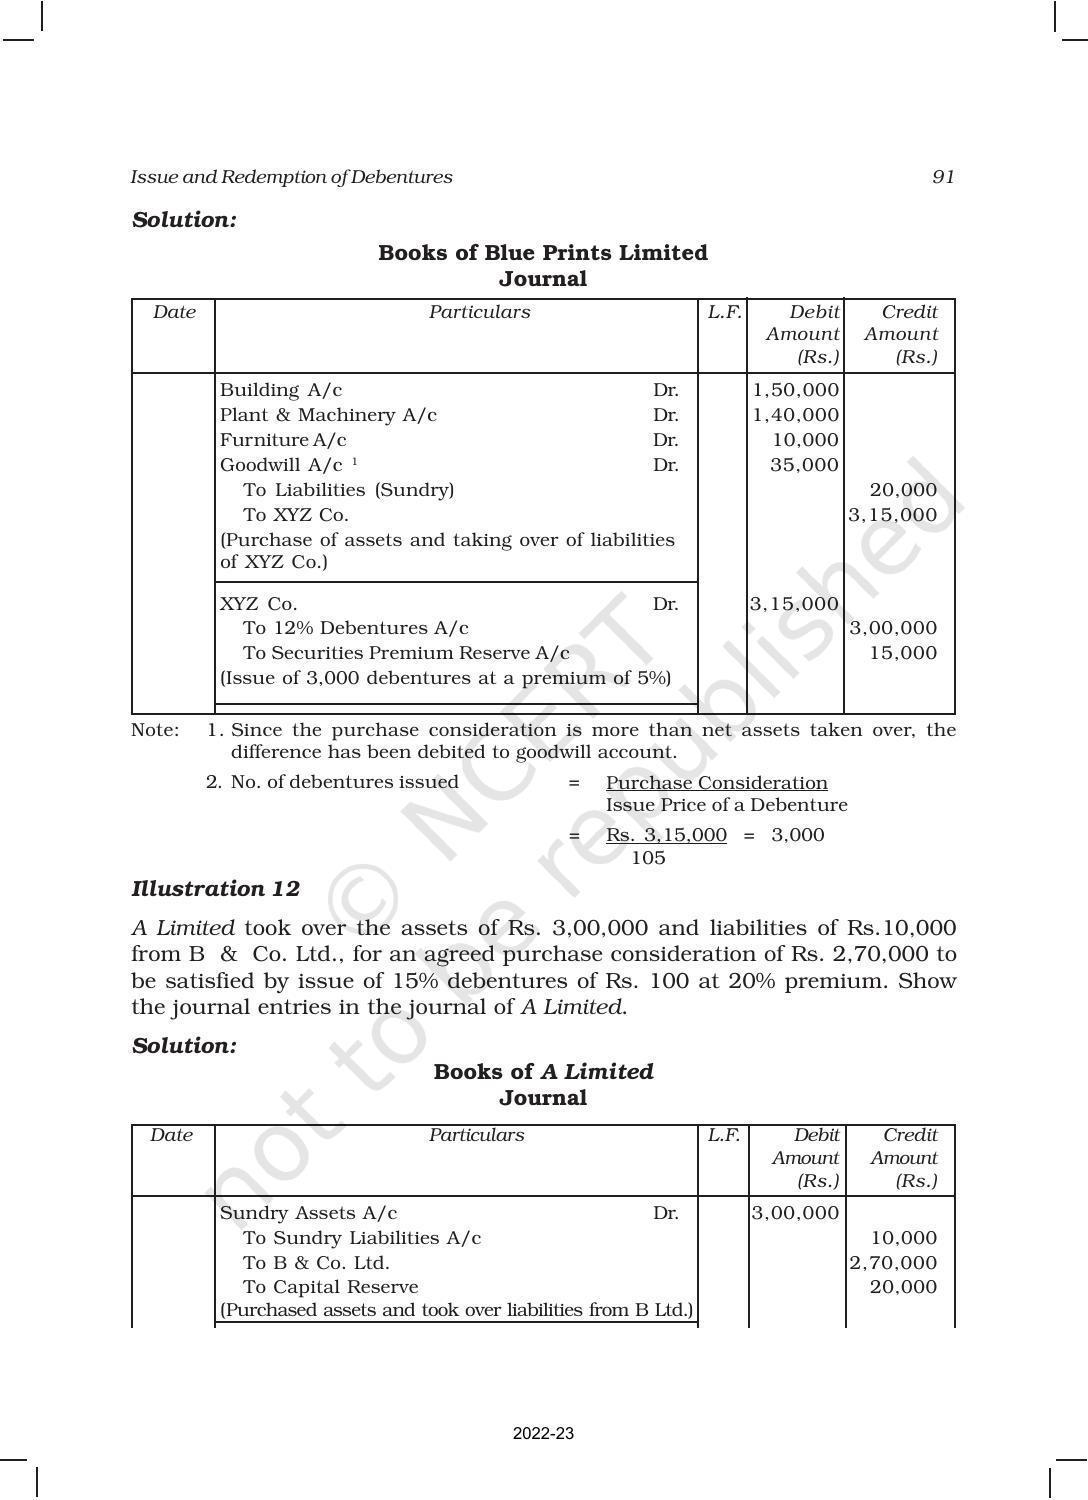 NCERT Book for Class 12 Accountancy Part II Chapter 1 Issue and Redemption of Debentures - Page 17